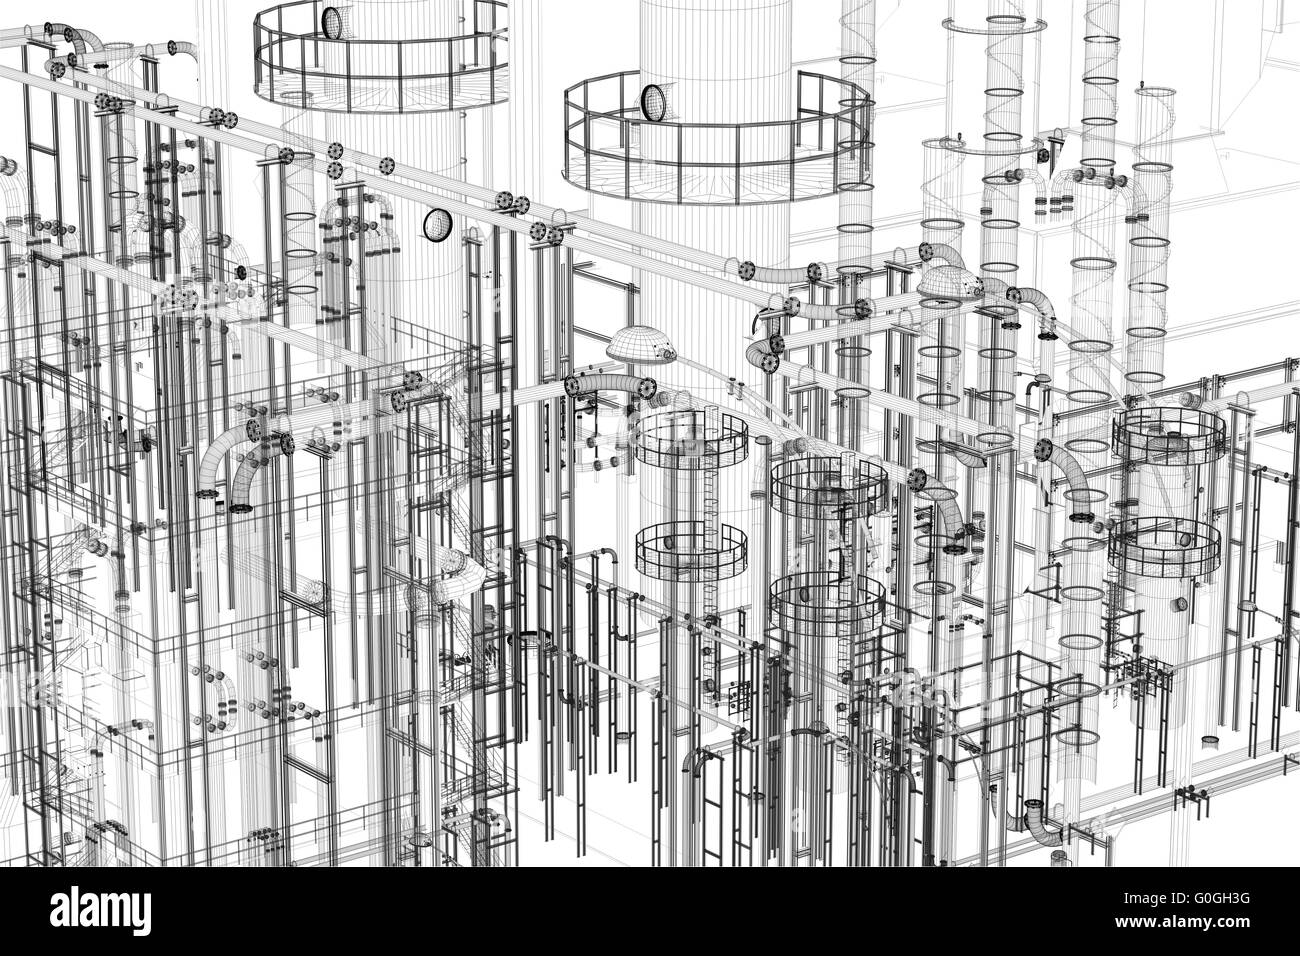 Abstract industriale, tecnologico. Engineering, factory Foto Stock